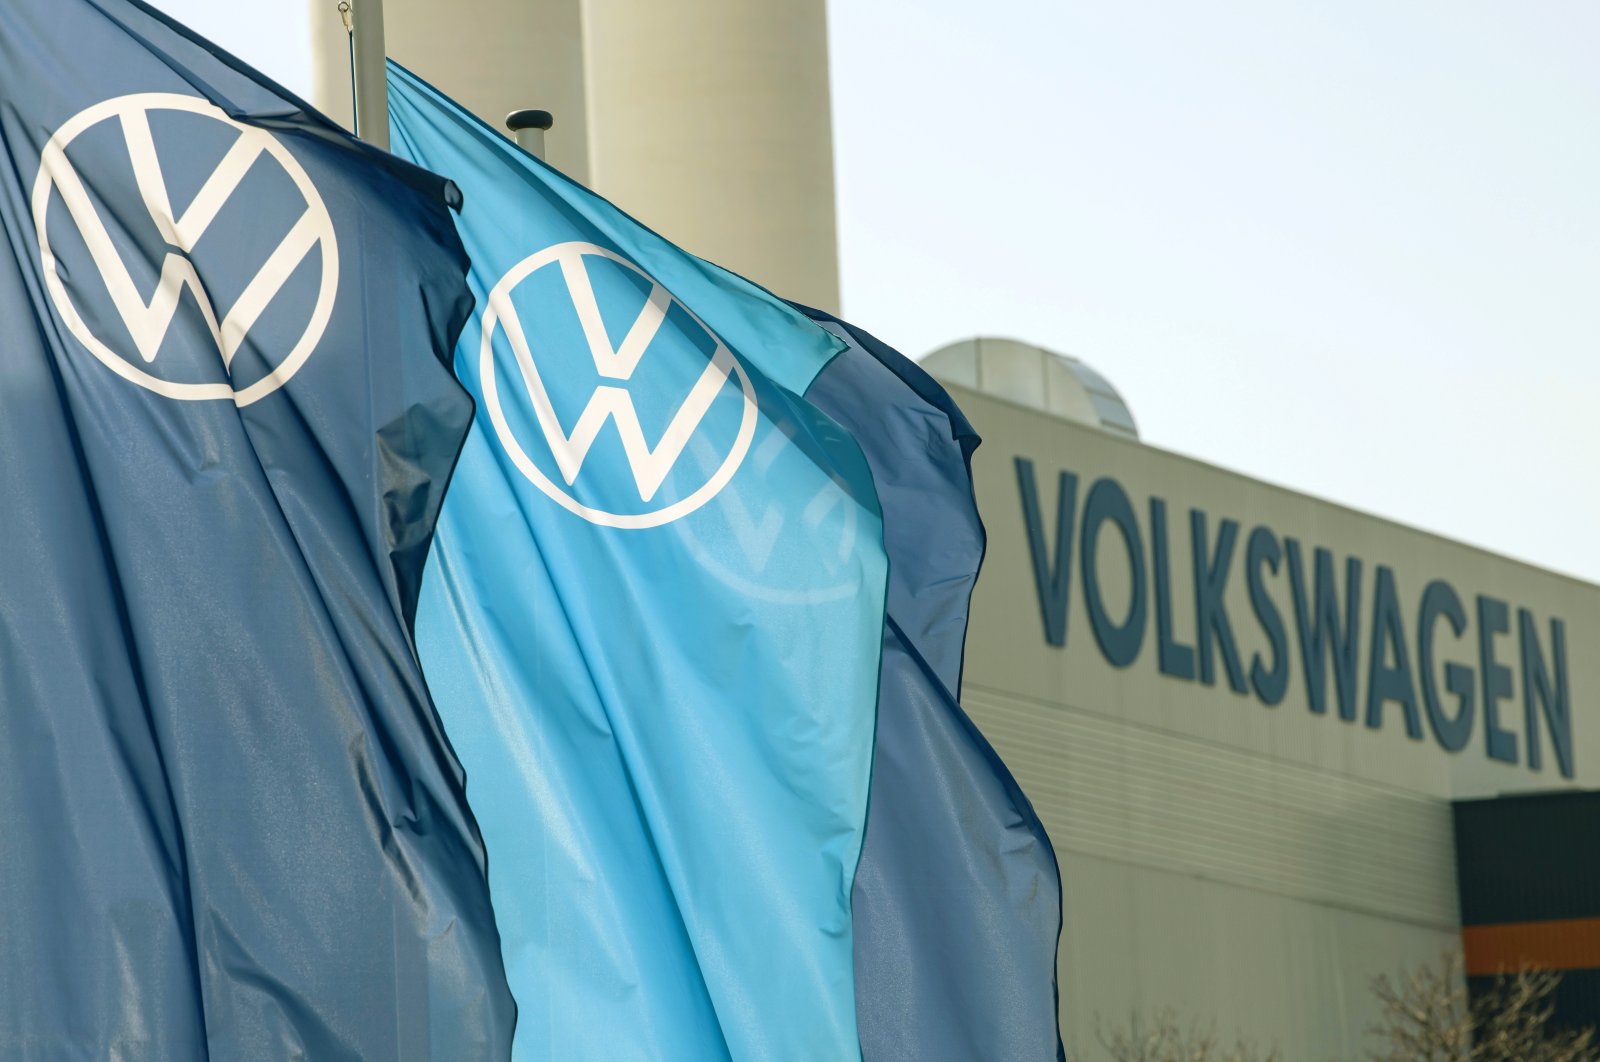 Company logo flags wave in front of a Volkswagen factory building in Zwickau, Germany, April 23, 2020. (AP Photo)